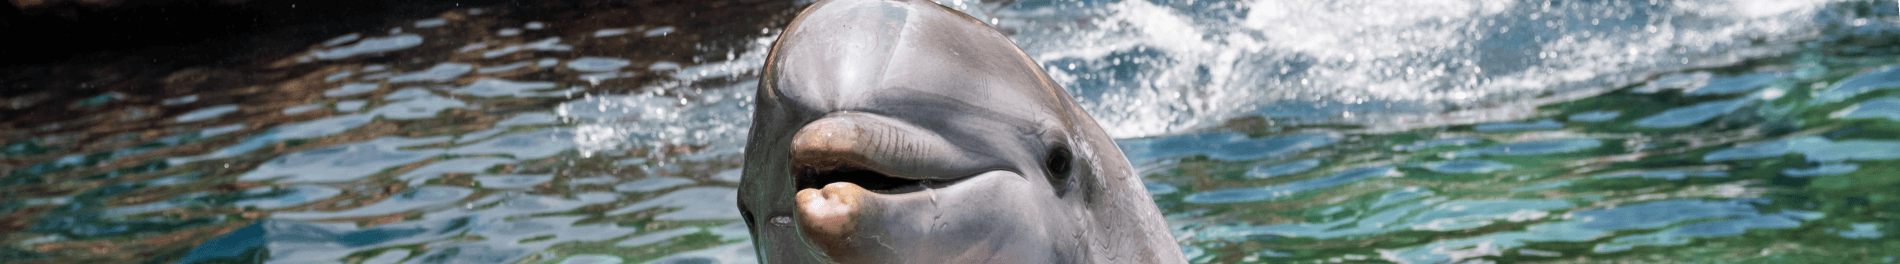 Dolphins up close 